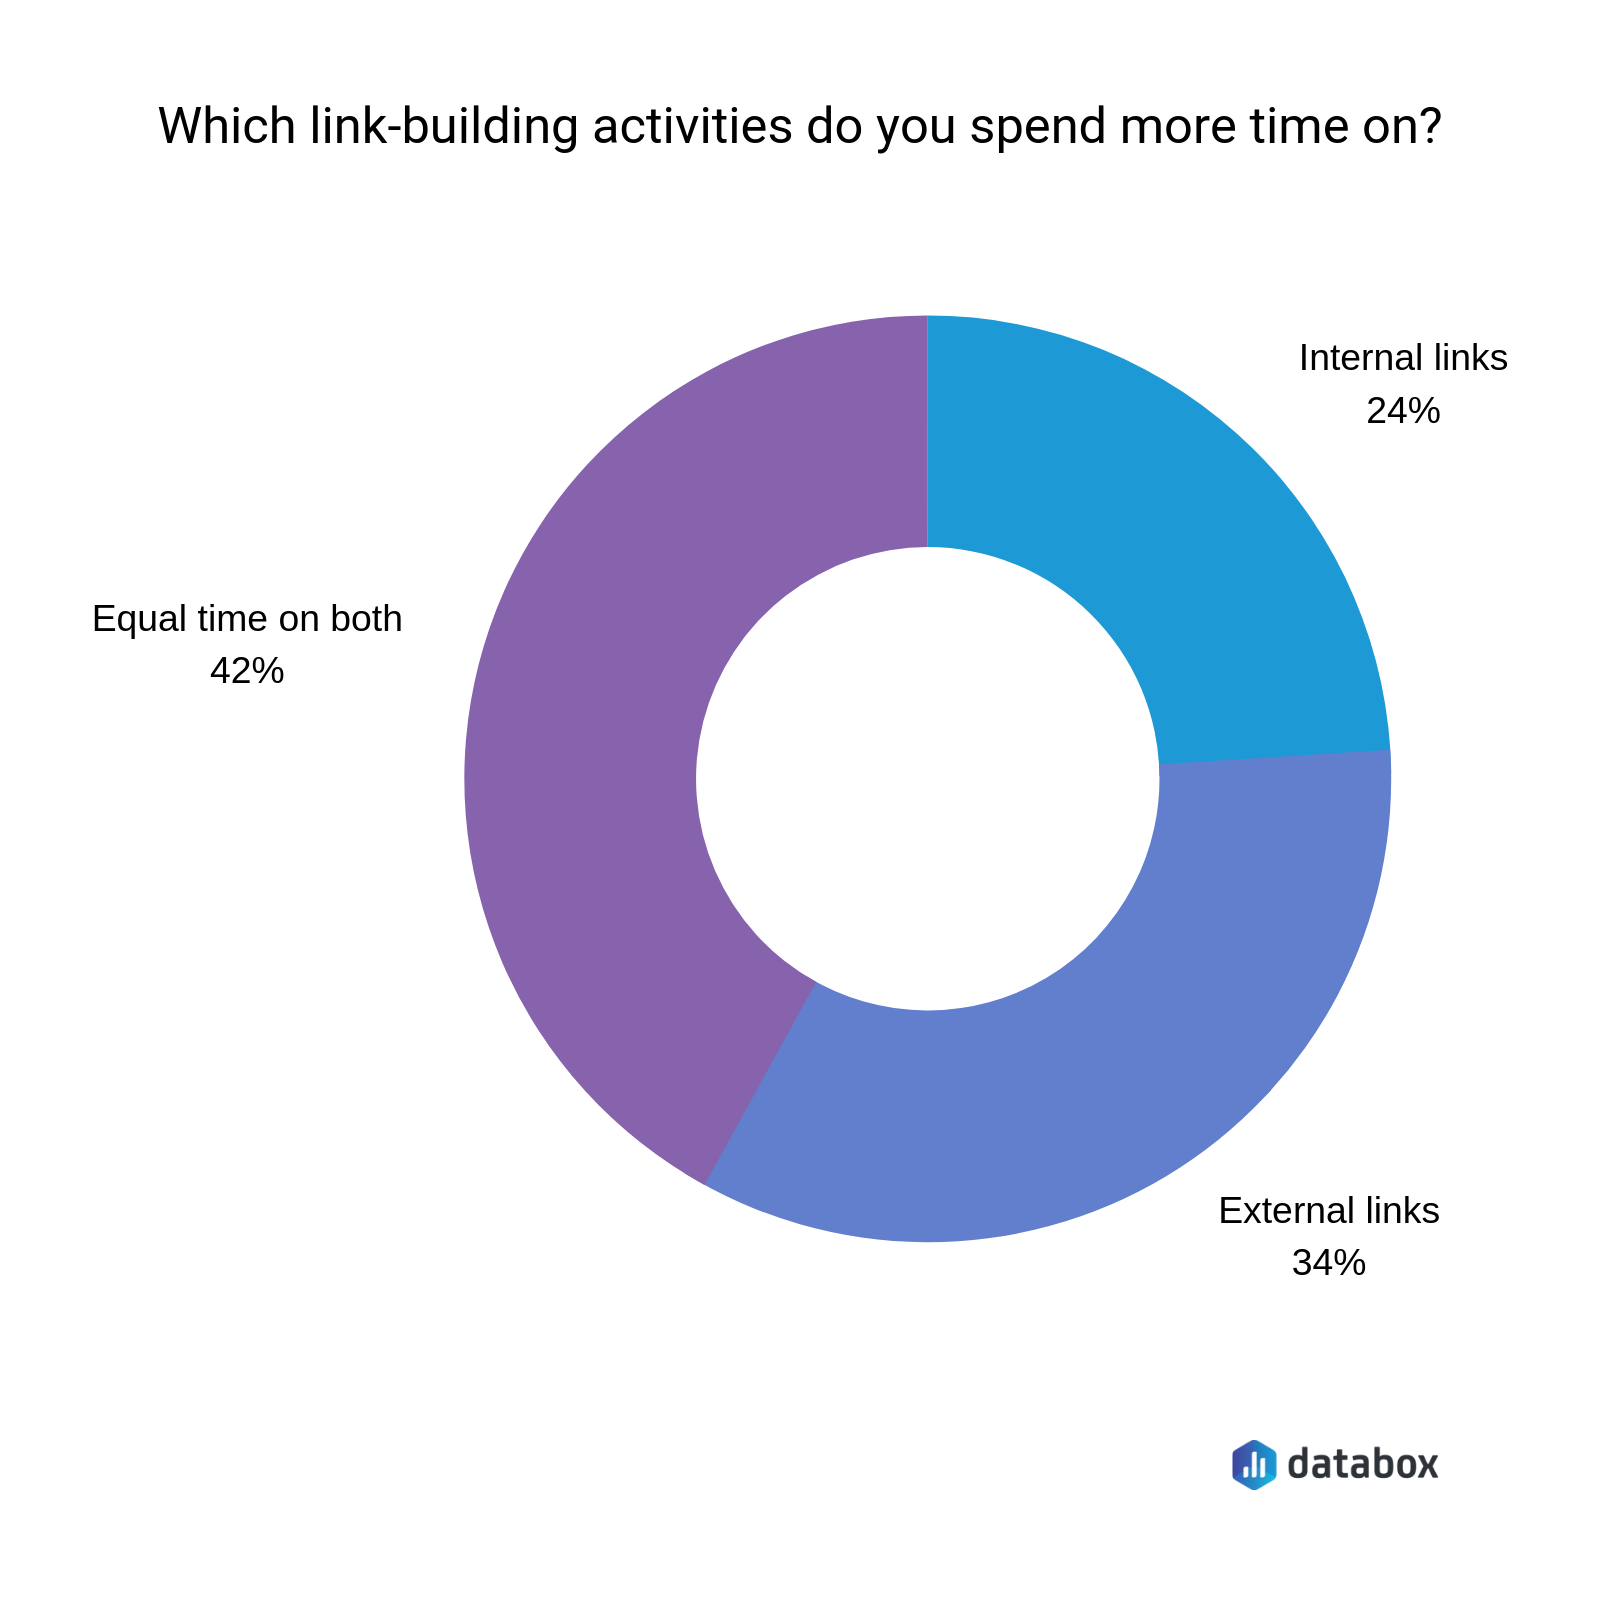 SEOs spend most of their link building time on getting external links